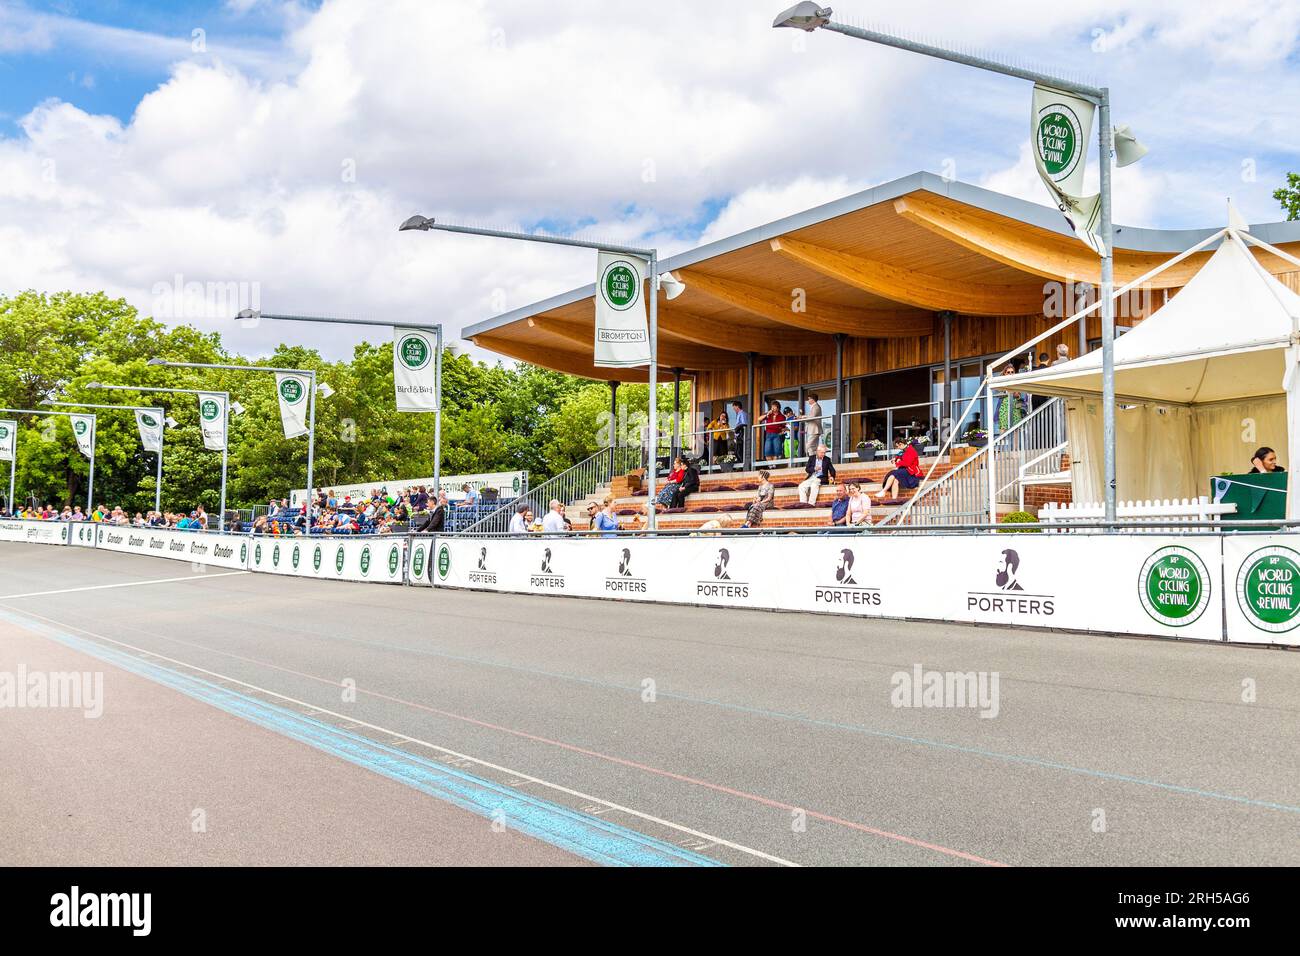 Herne Hill Velodrome during the World Cycling Revival Festival 2018, London, UK Stock Photo